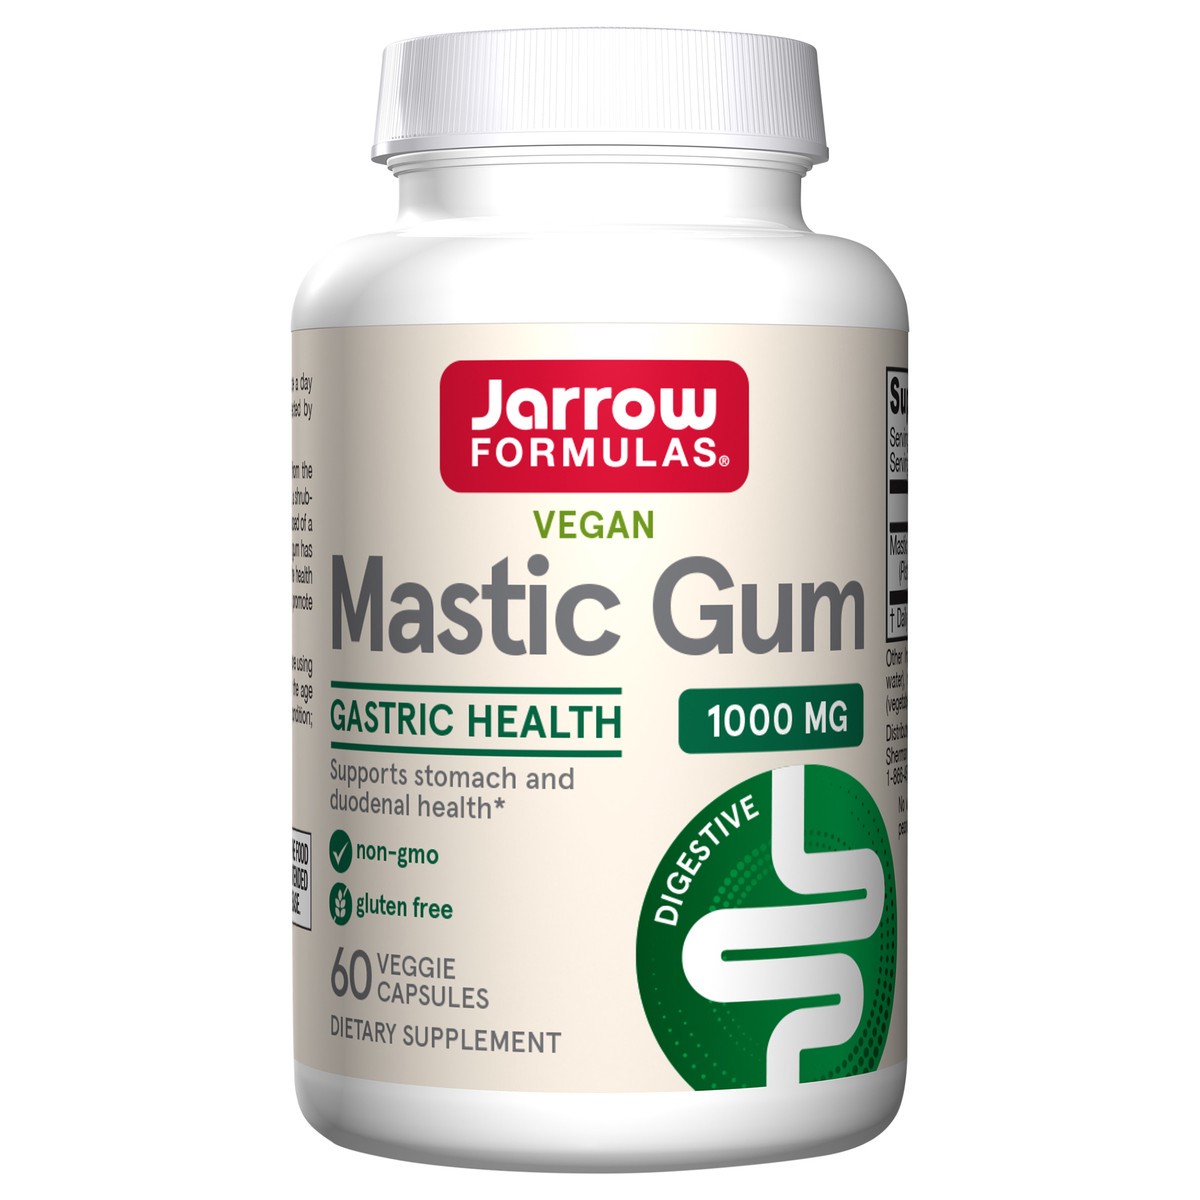 slide 4 of 5, Jarrow Formulas Mastic Gum 1000 mg - for Gastric Health - 60 Veggie Caps - Naturally Sourced Formula Supporting Stomach & Duodenal Health - Dietary Supplement - 30 Servings - Vegan, 60 ct